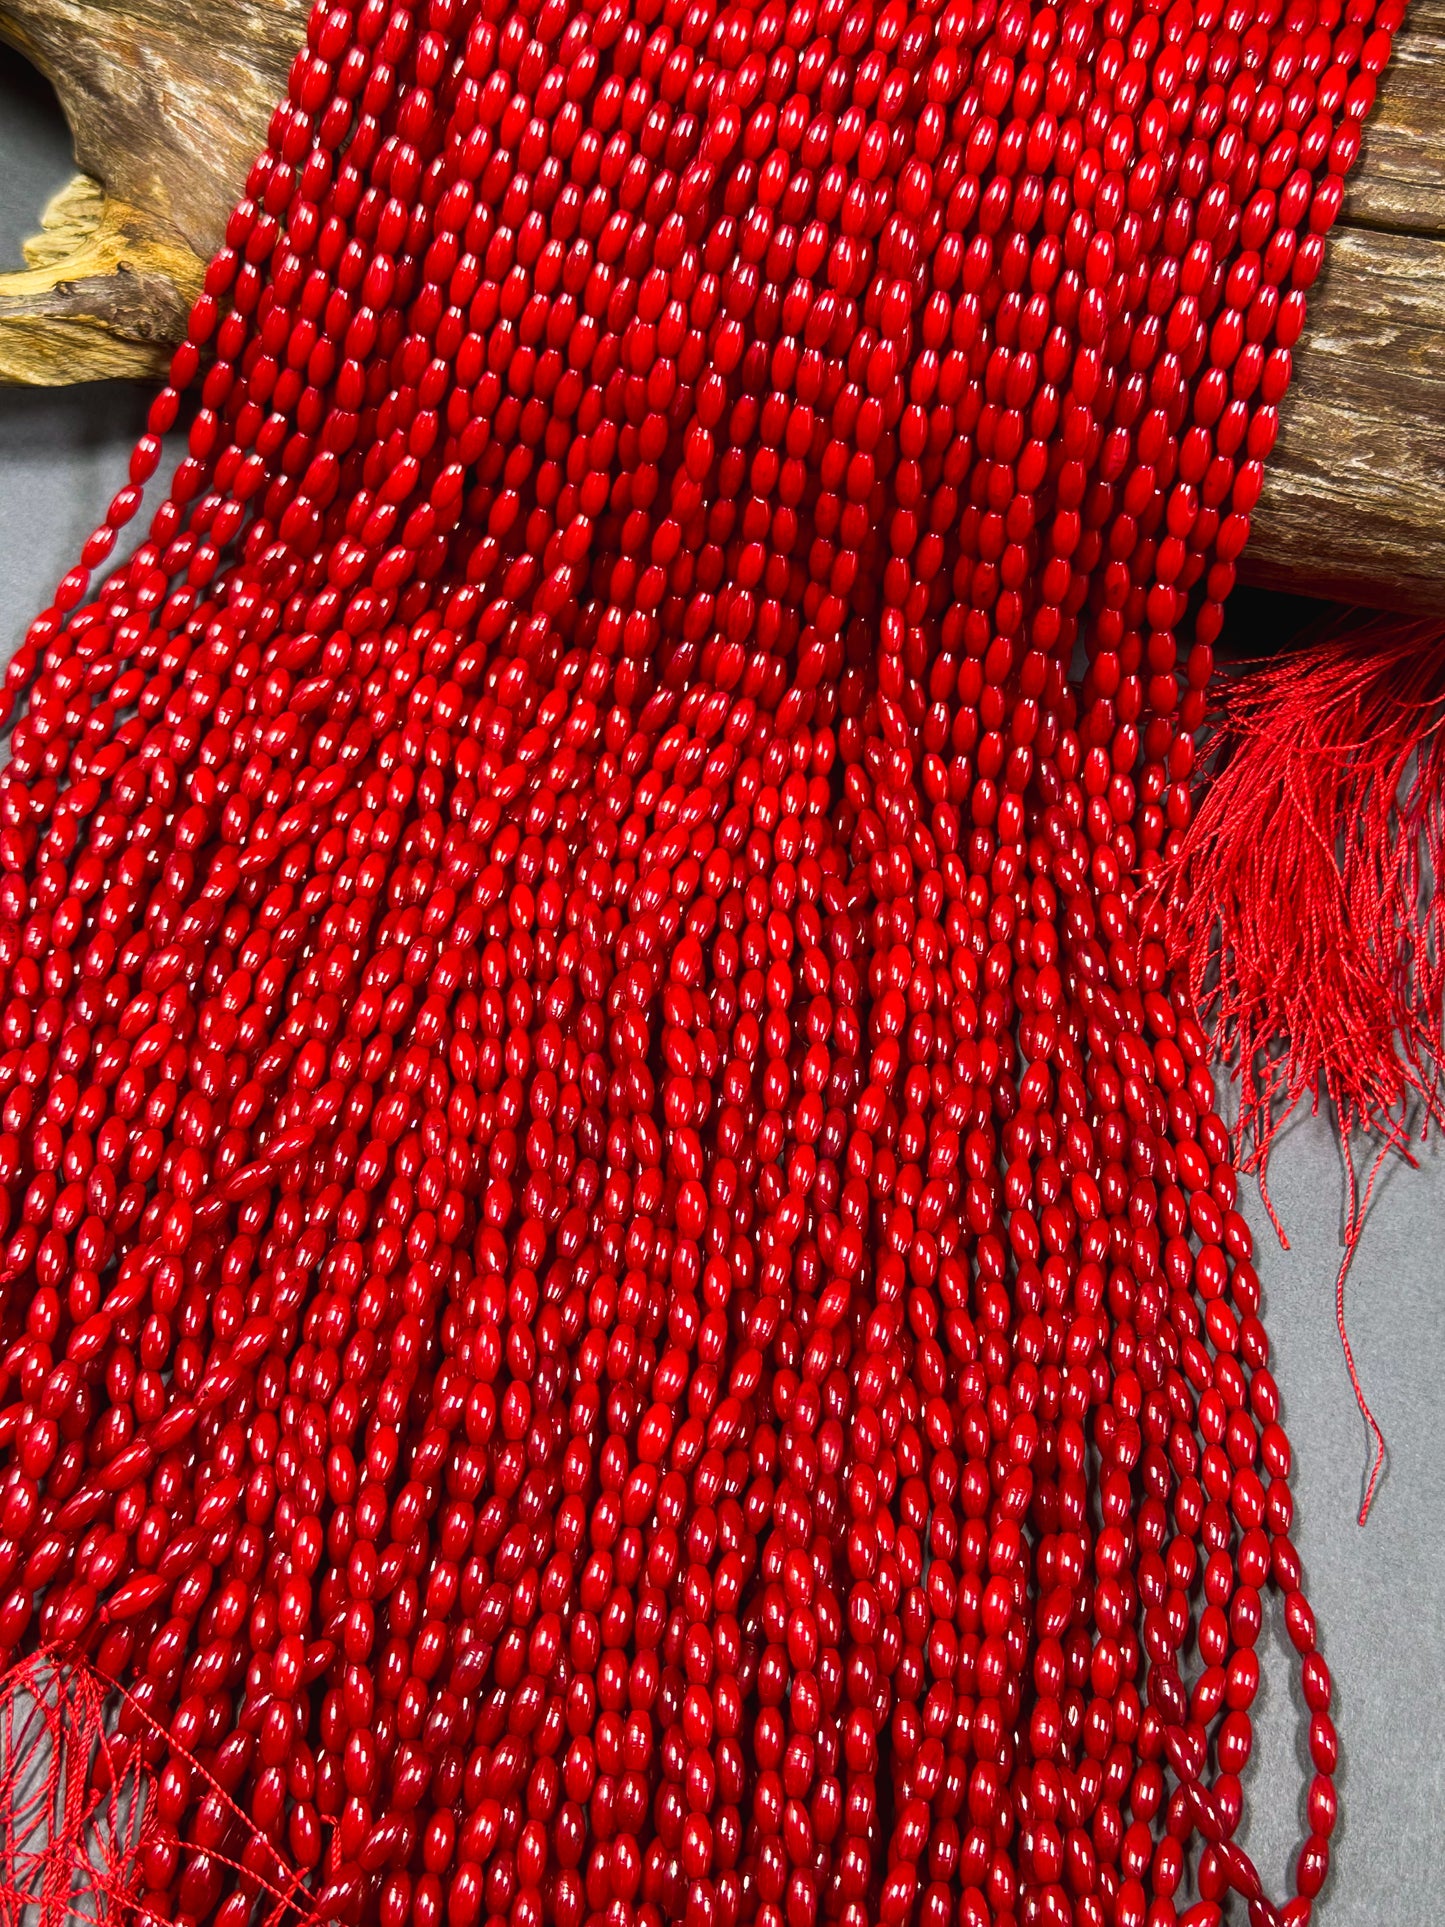 Natural Bamboo Coral Gemstone Bead 6x3mm Rice Shape Bead, Beautiful Natural Red Color Bamboo Coral Beads, Great Quality Full Strand 15.5"